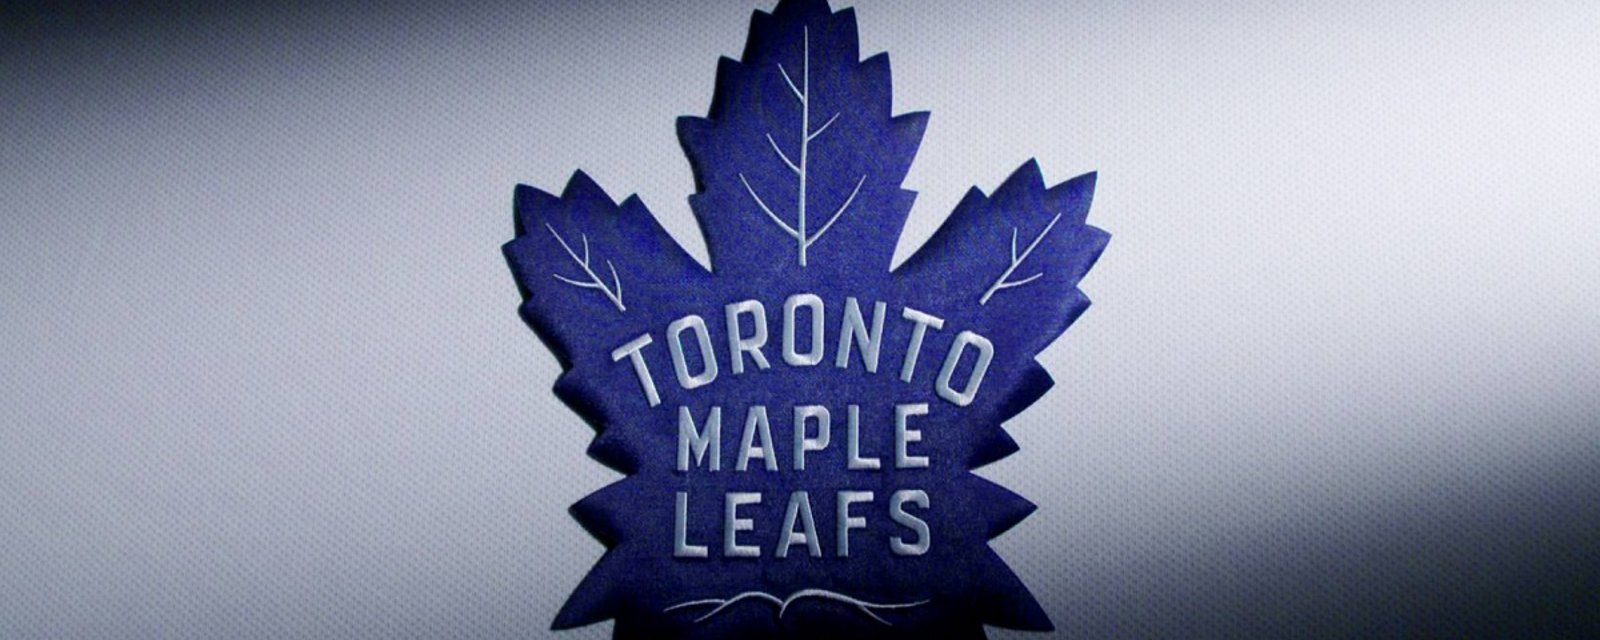 Yet another Maple Leaf earns “Rookie of the Month” honors.